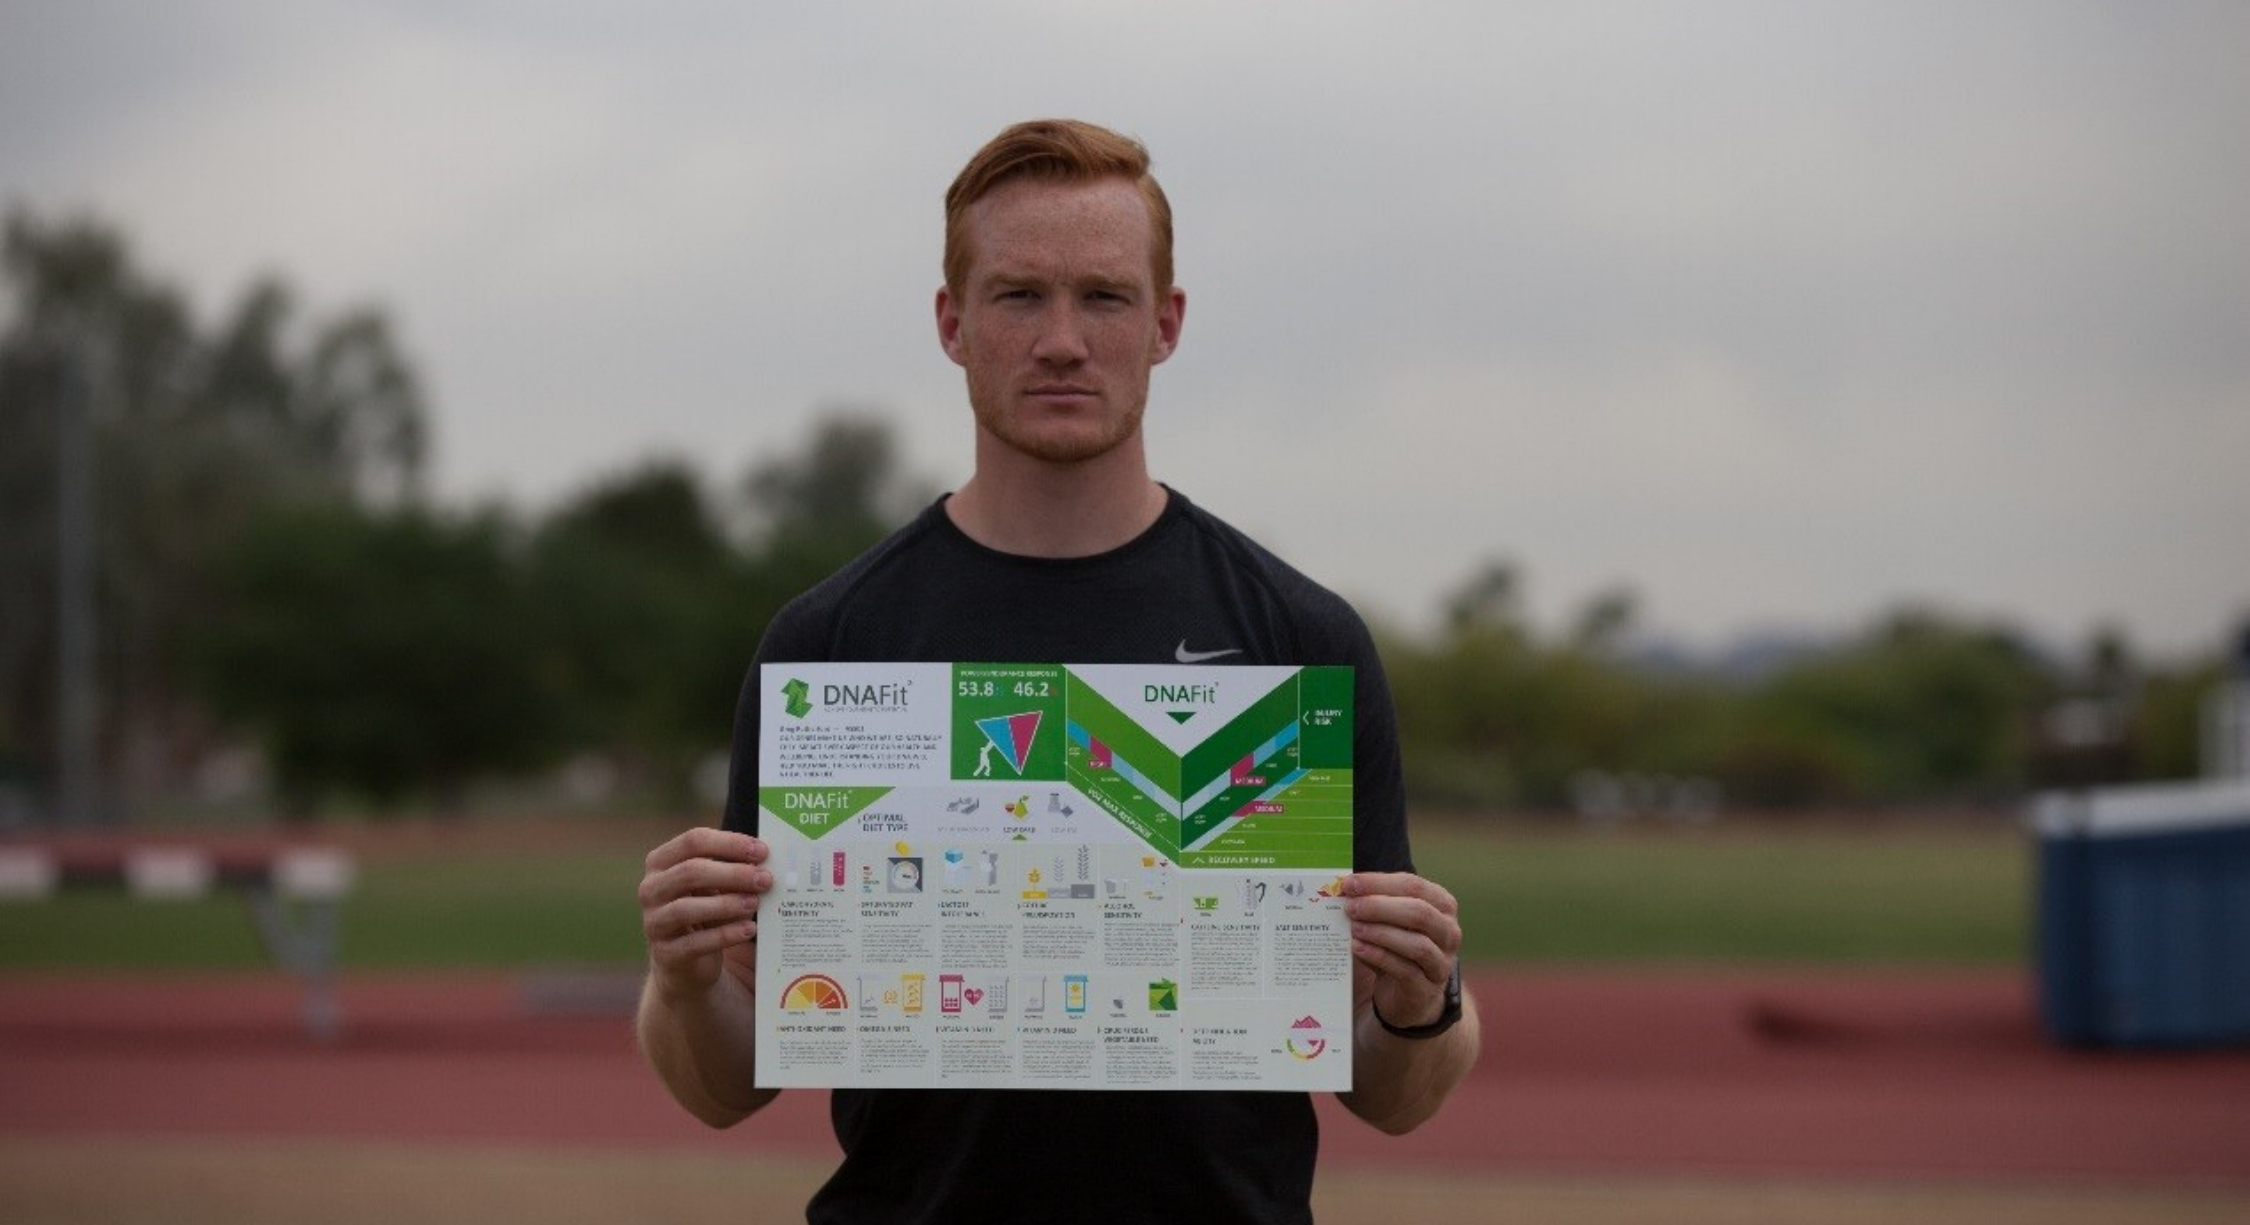 A day in the life of an athlete - Greg Rutherford